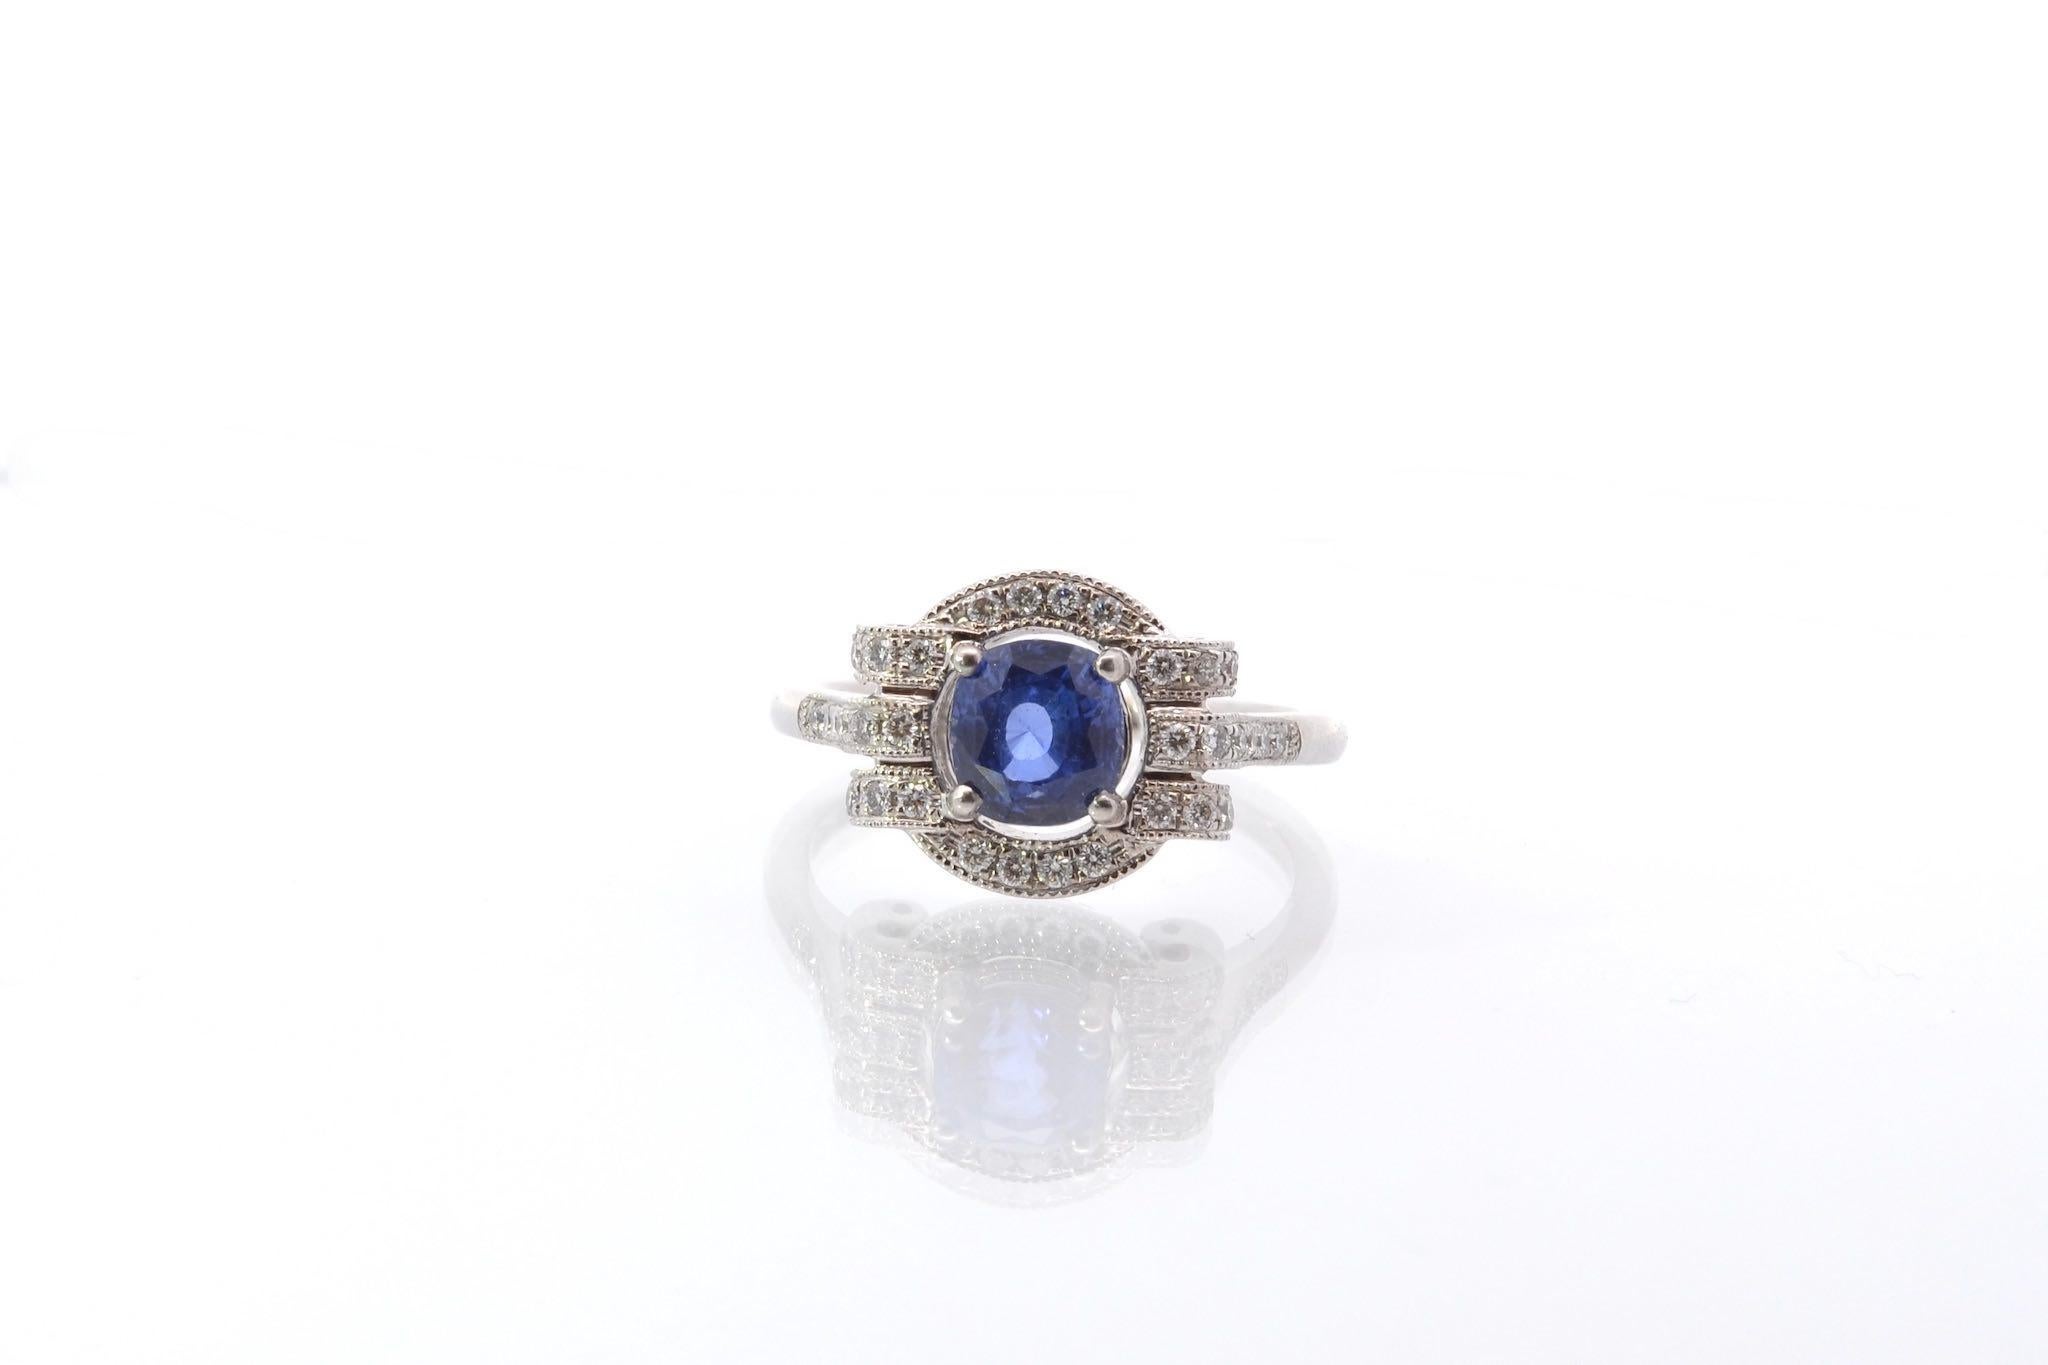 Stones: Sapphire: 1.60 cts and 36 diamonds: 0.26 ct
Material: 18k white gold
Dimensions: 1.4 x 1.1cm
Weight: 4.9g
Period: Recent vintage style
Size: 53 (free sizing)
Certificate
Ref. : 25569